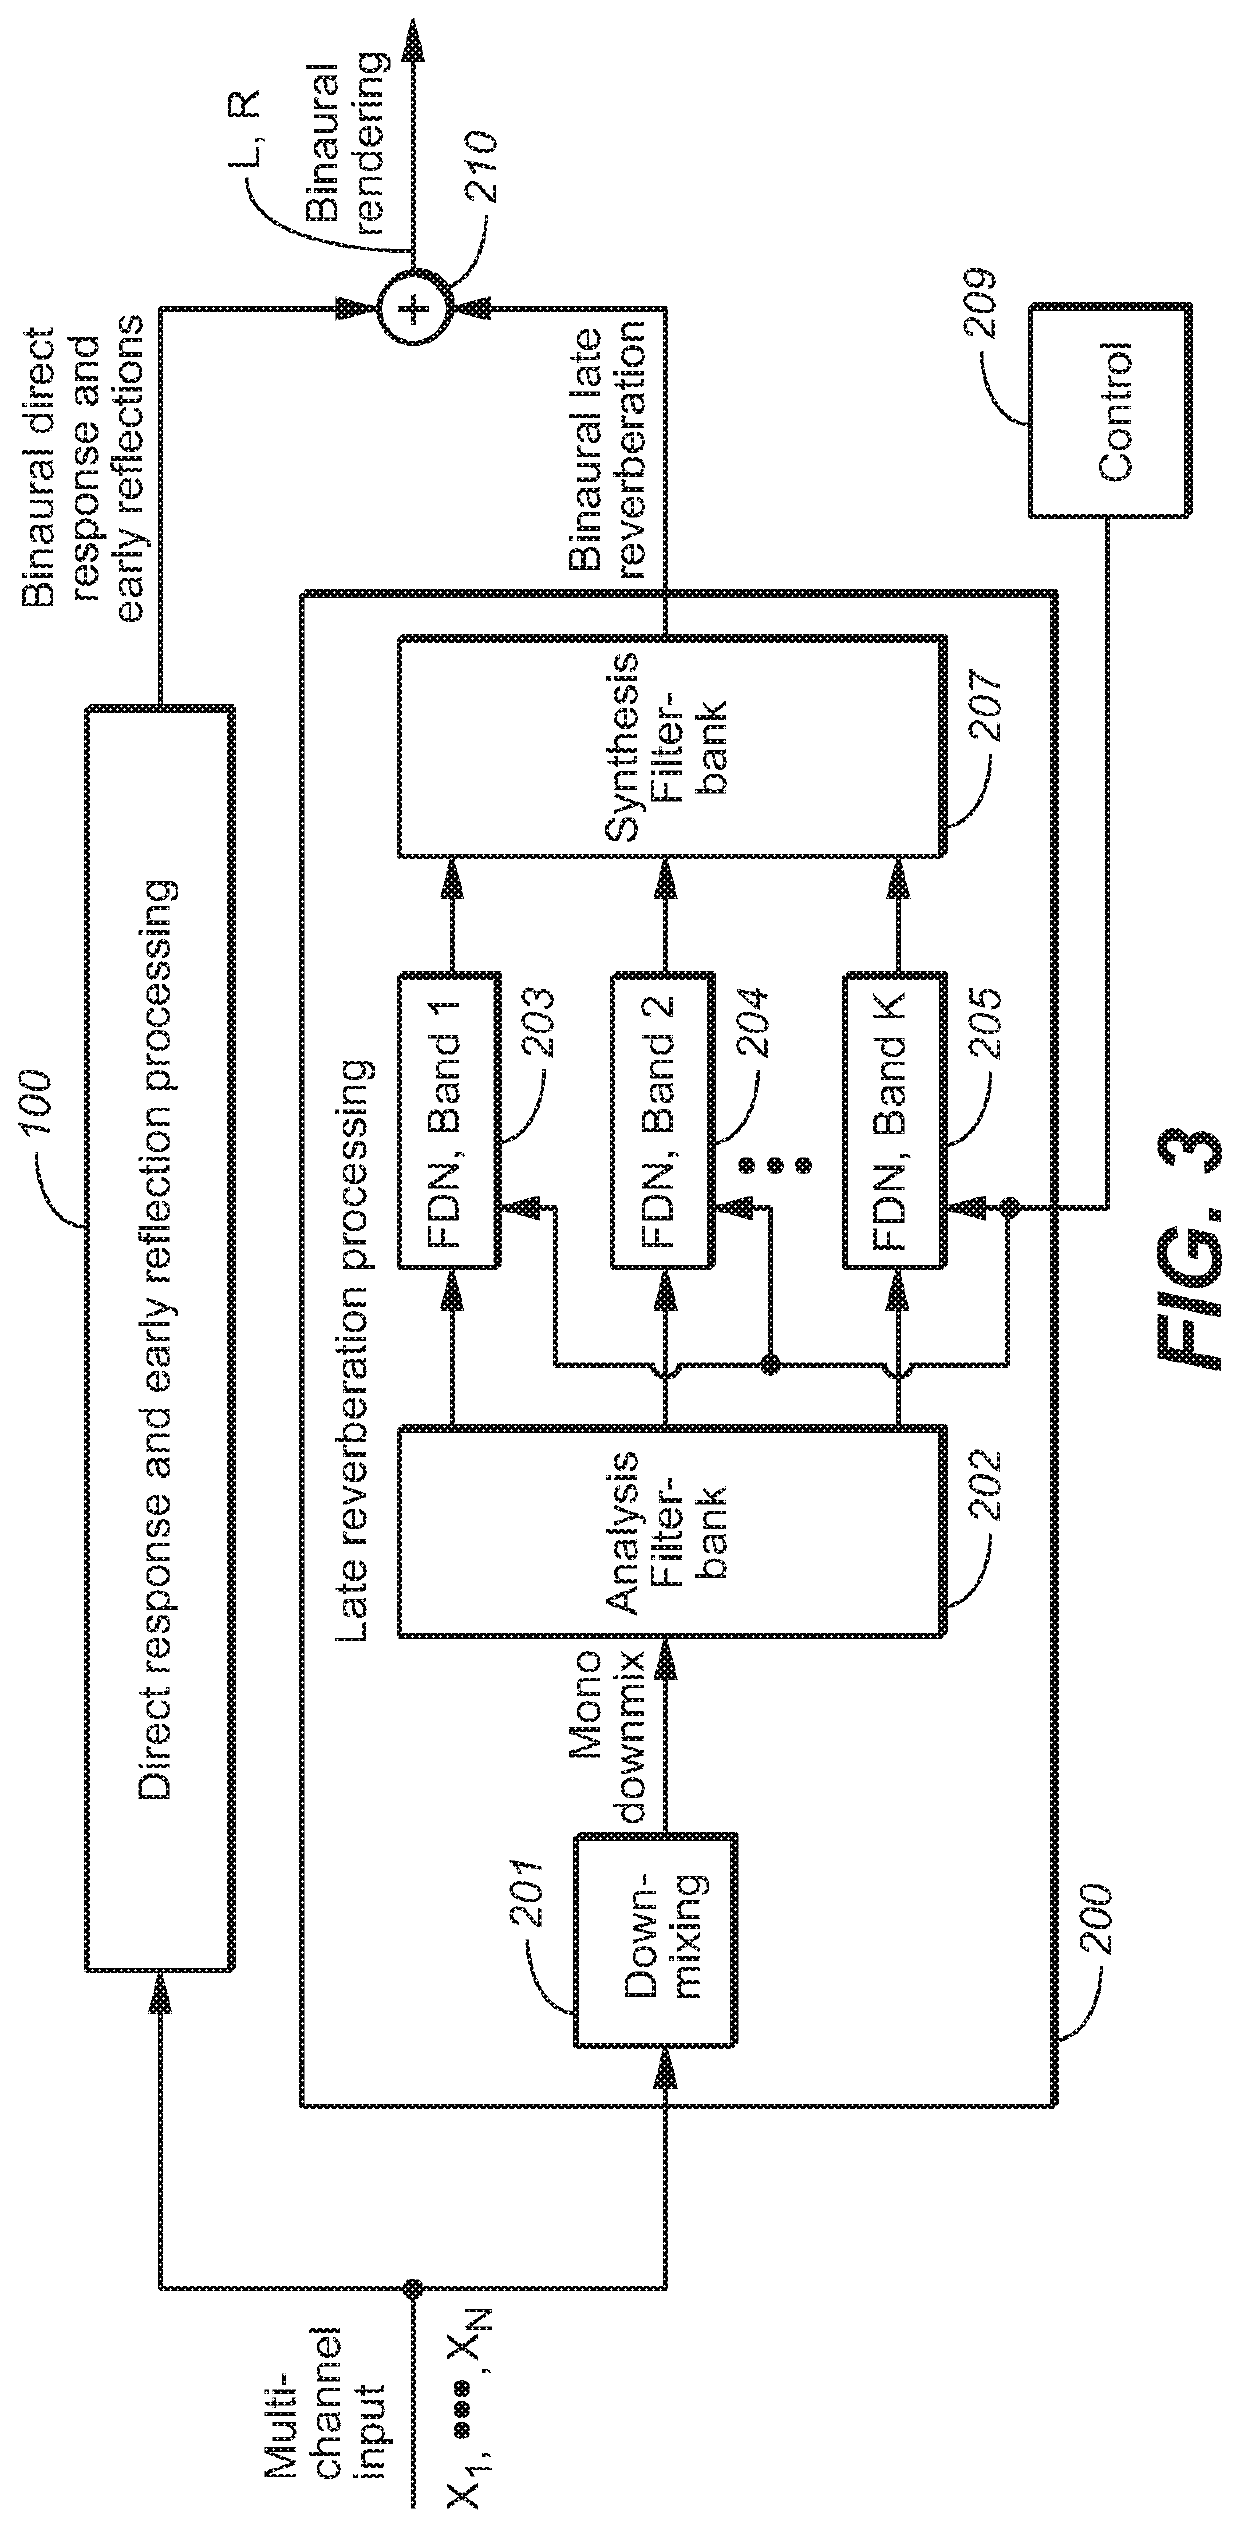 Generating binaural audio in response to multi-channel audio using at least one feedback delay network